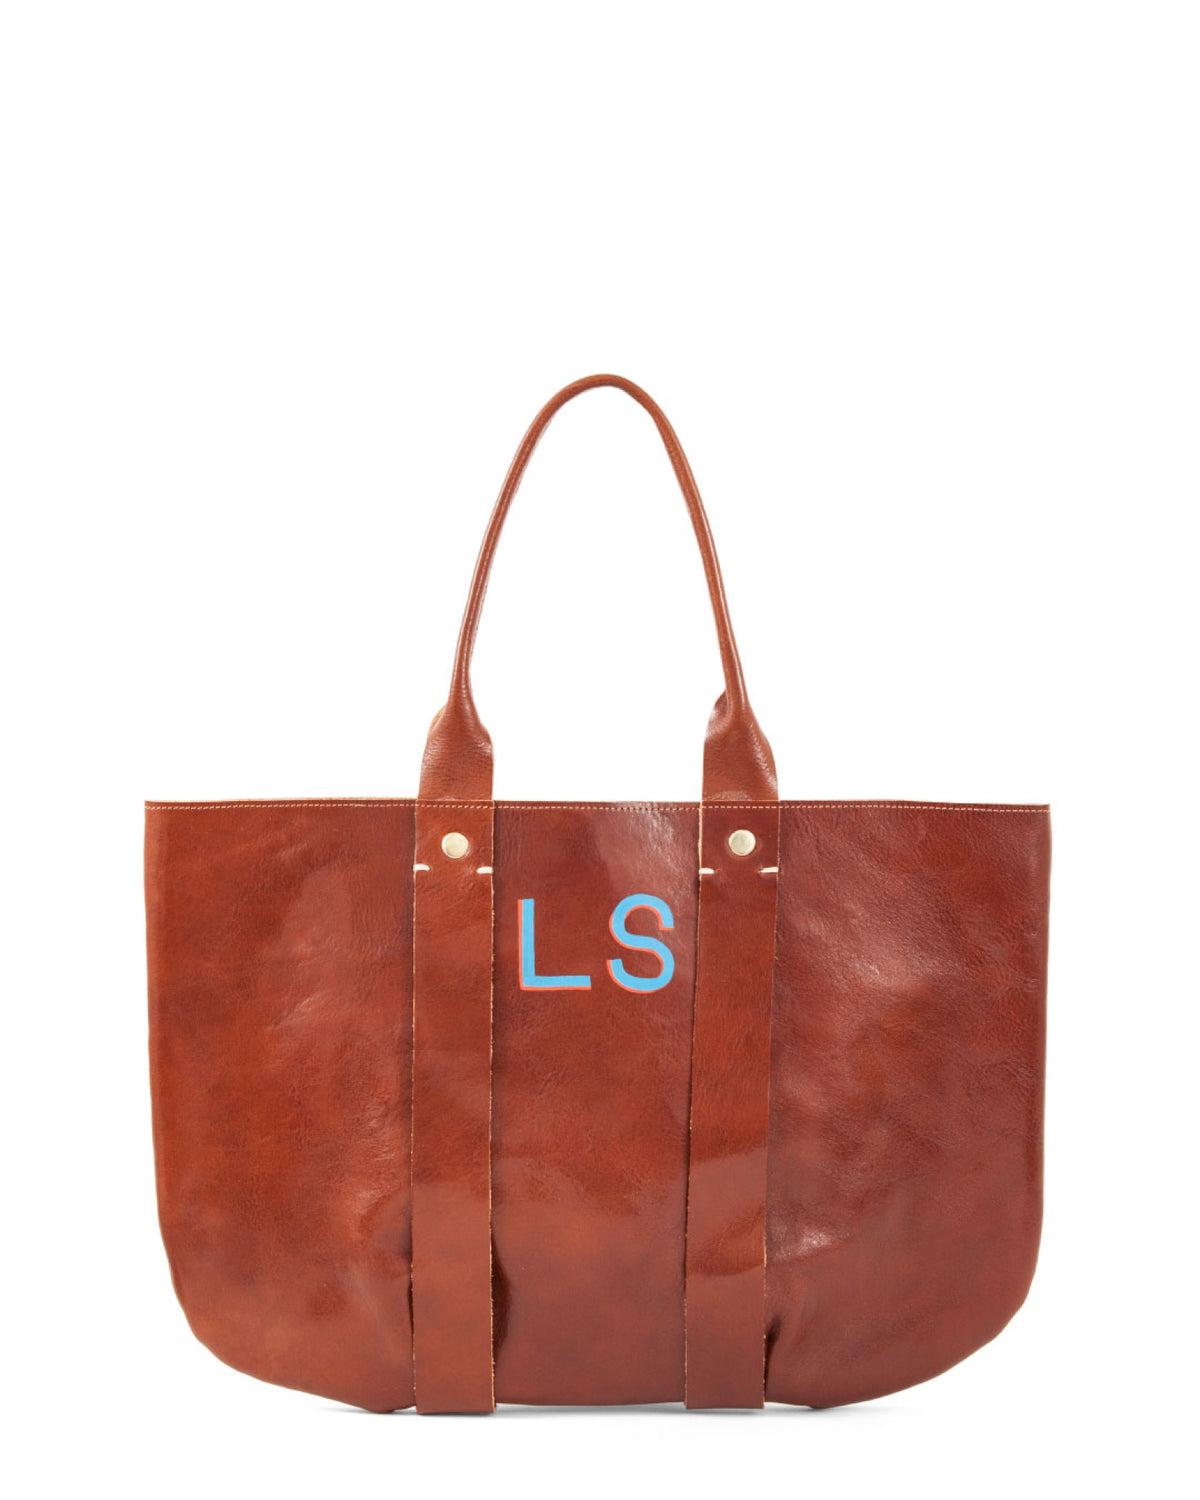 Brown La Tropezienne with 2 Inch Hand Painted Letters On The Top Center Of The Bag.